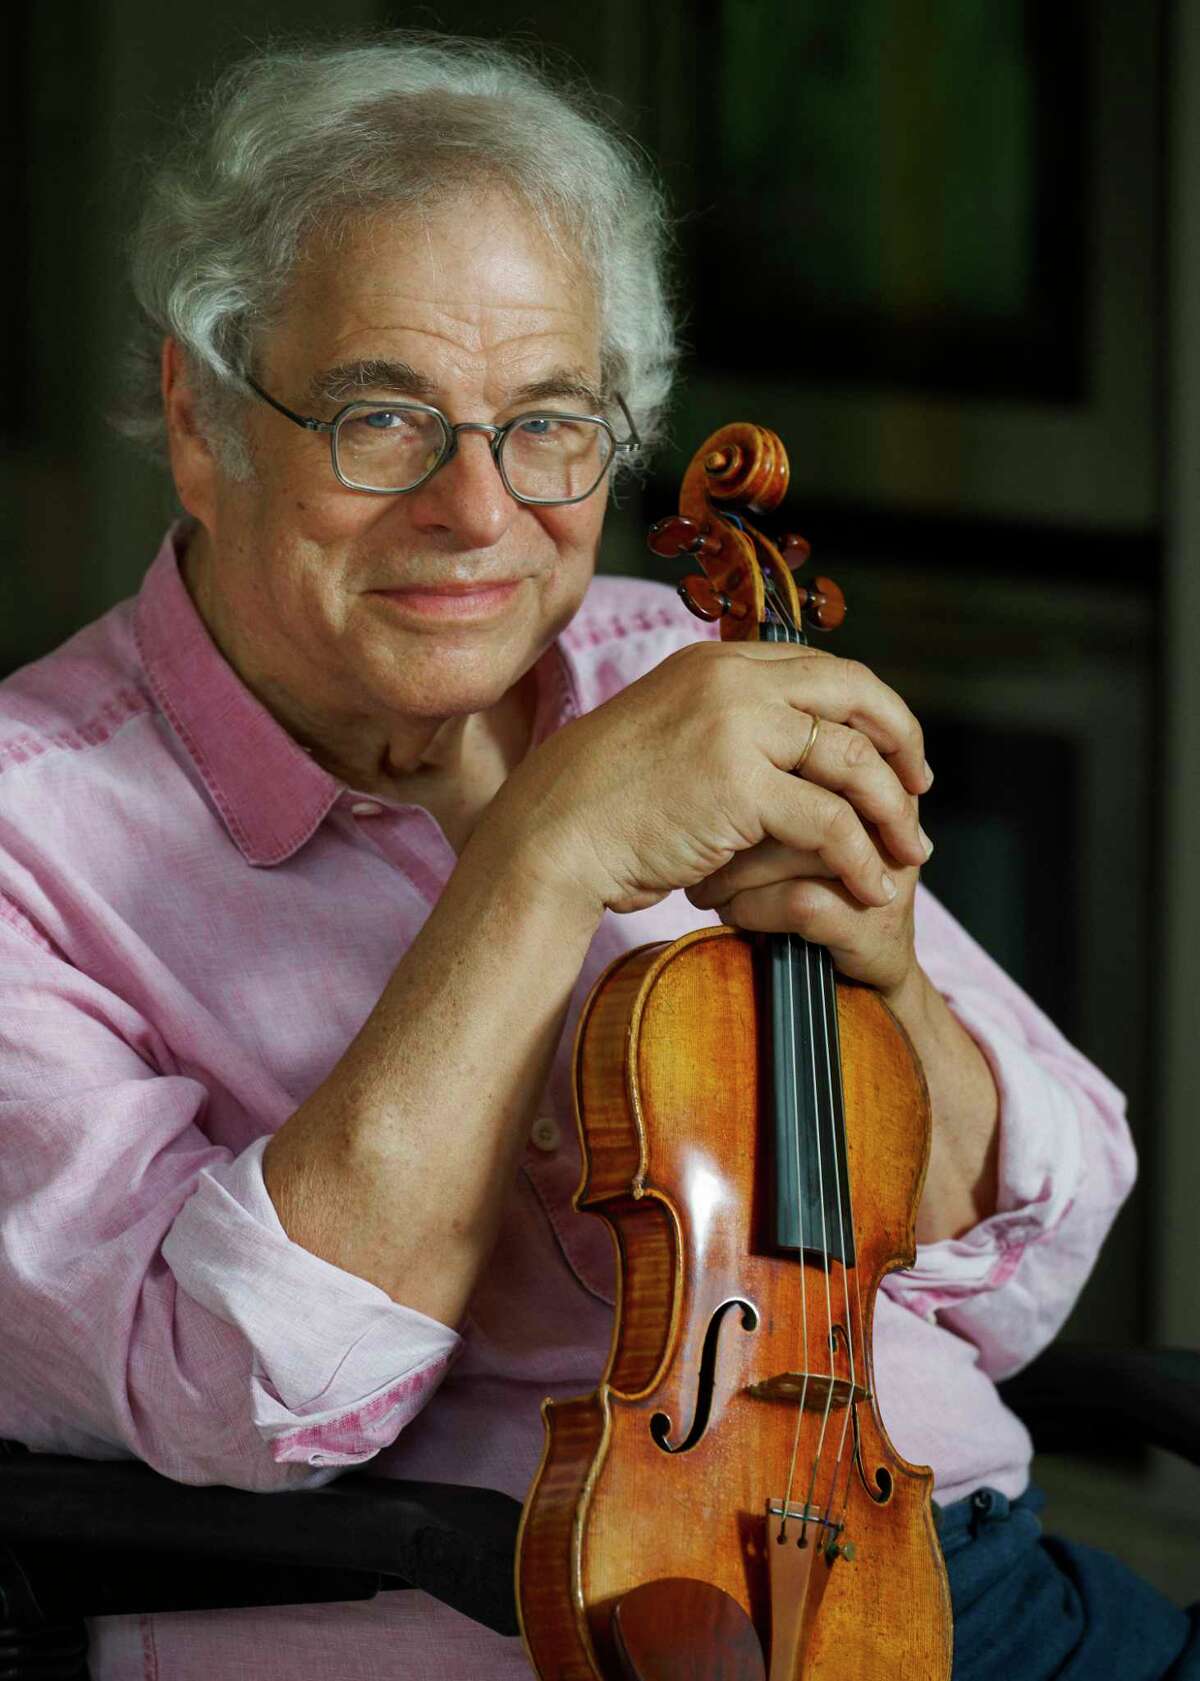 Itzhak Perlman at his home in East Hampton, N.Y., Aug. 16, 2020. Turning 75 this month, he has been so ubiquitous for so long that it is easy to take him for granted. (Yael Malka/The New York Times)